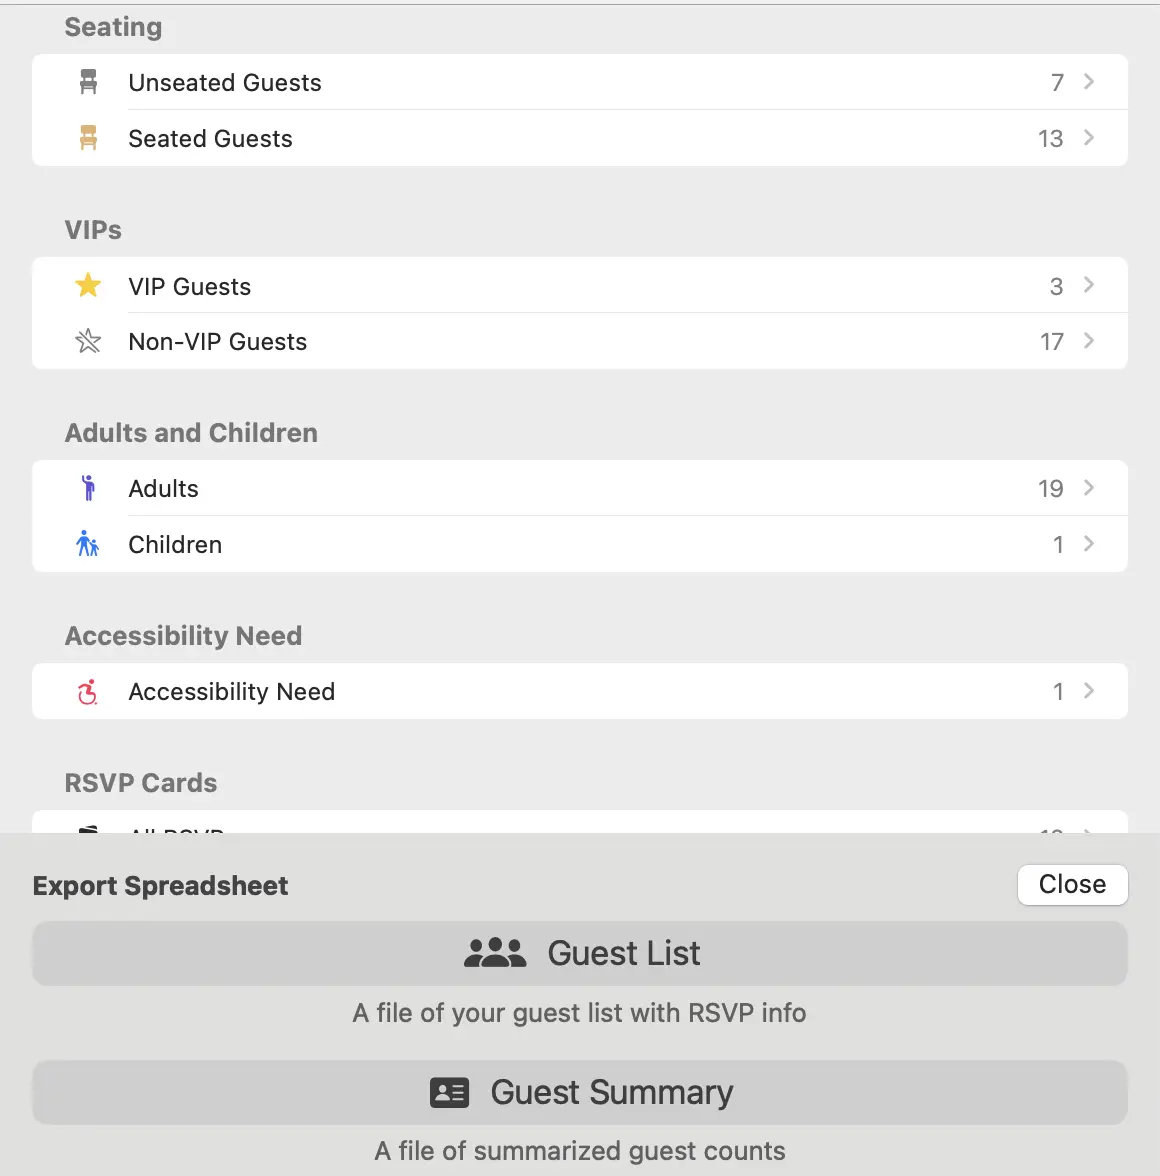 The guest report shows different summaries of your guest list